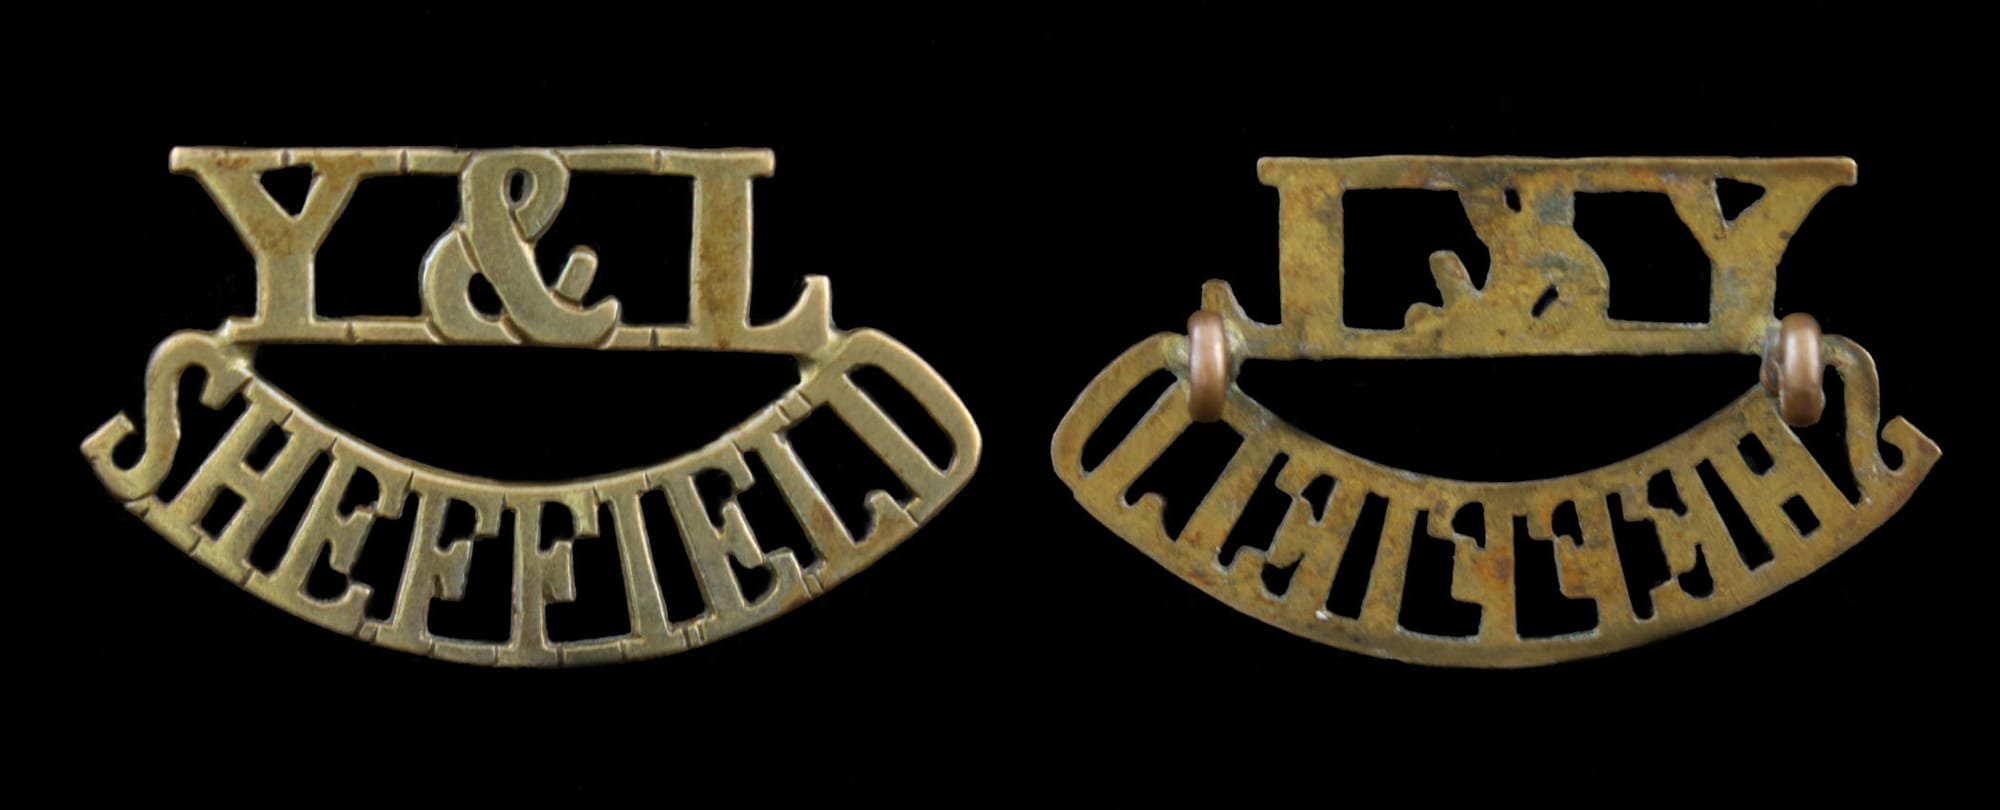 Other Ranks Shoulder Title of the 12th (Service) Battalion 1914 to 1918